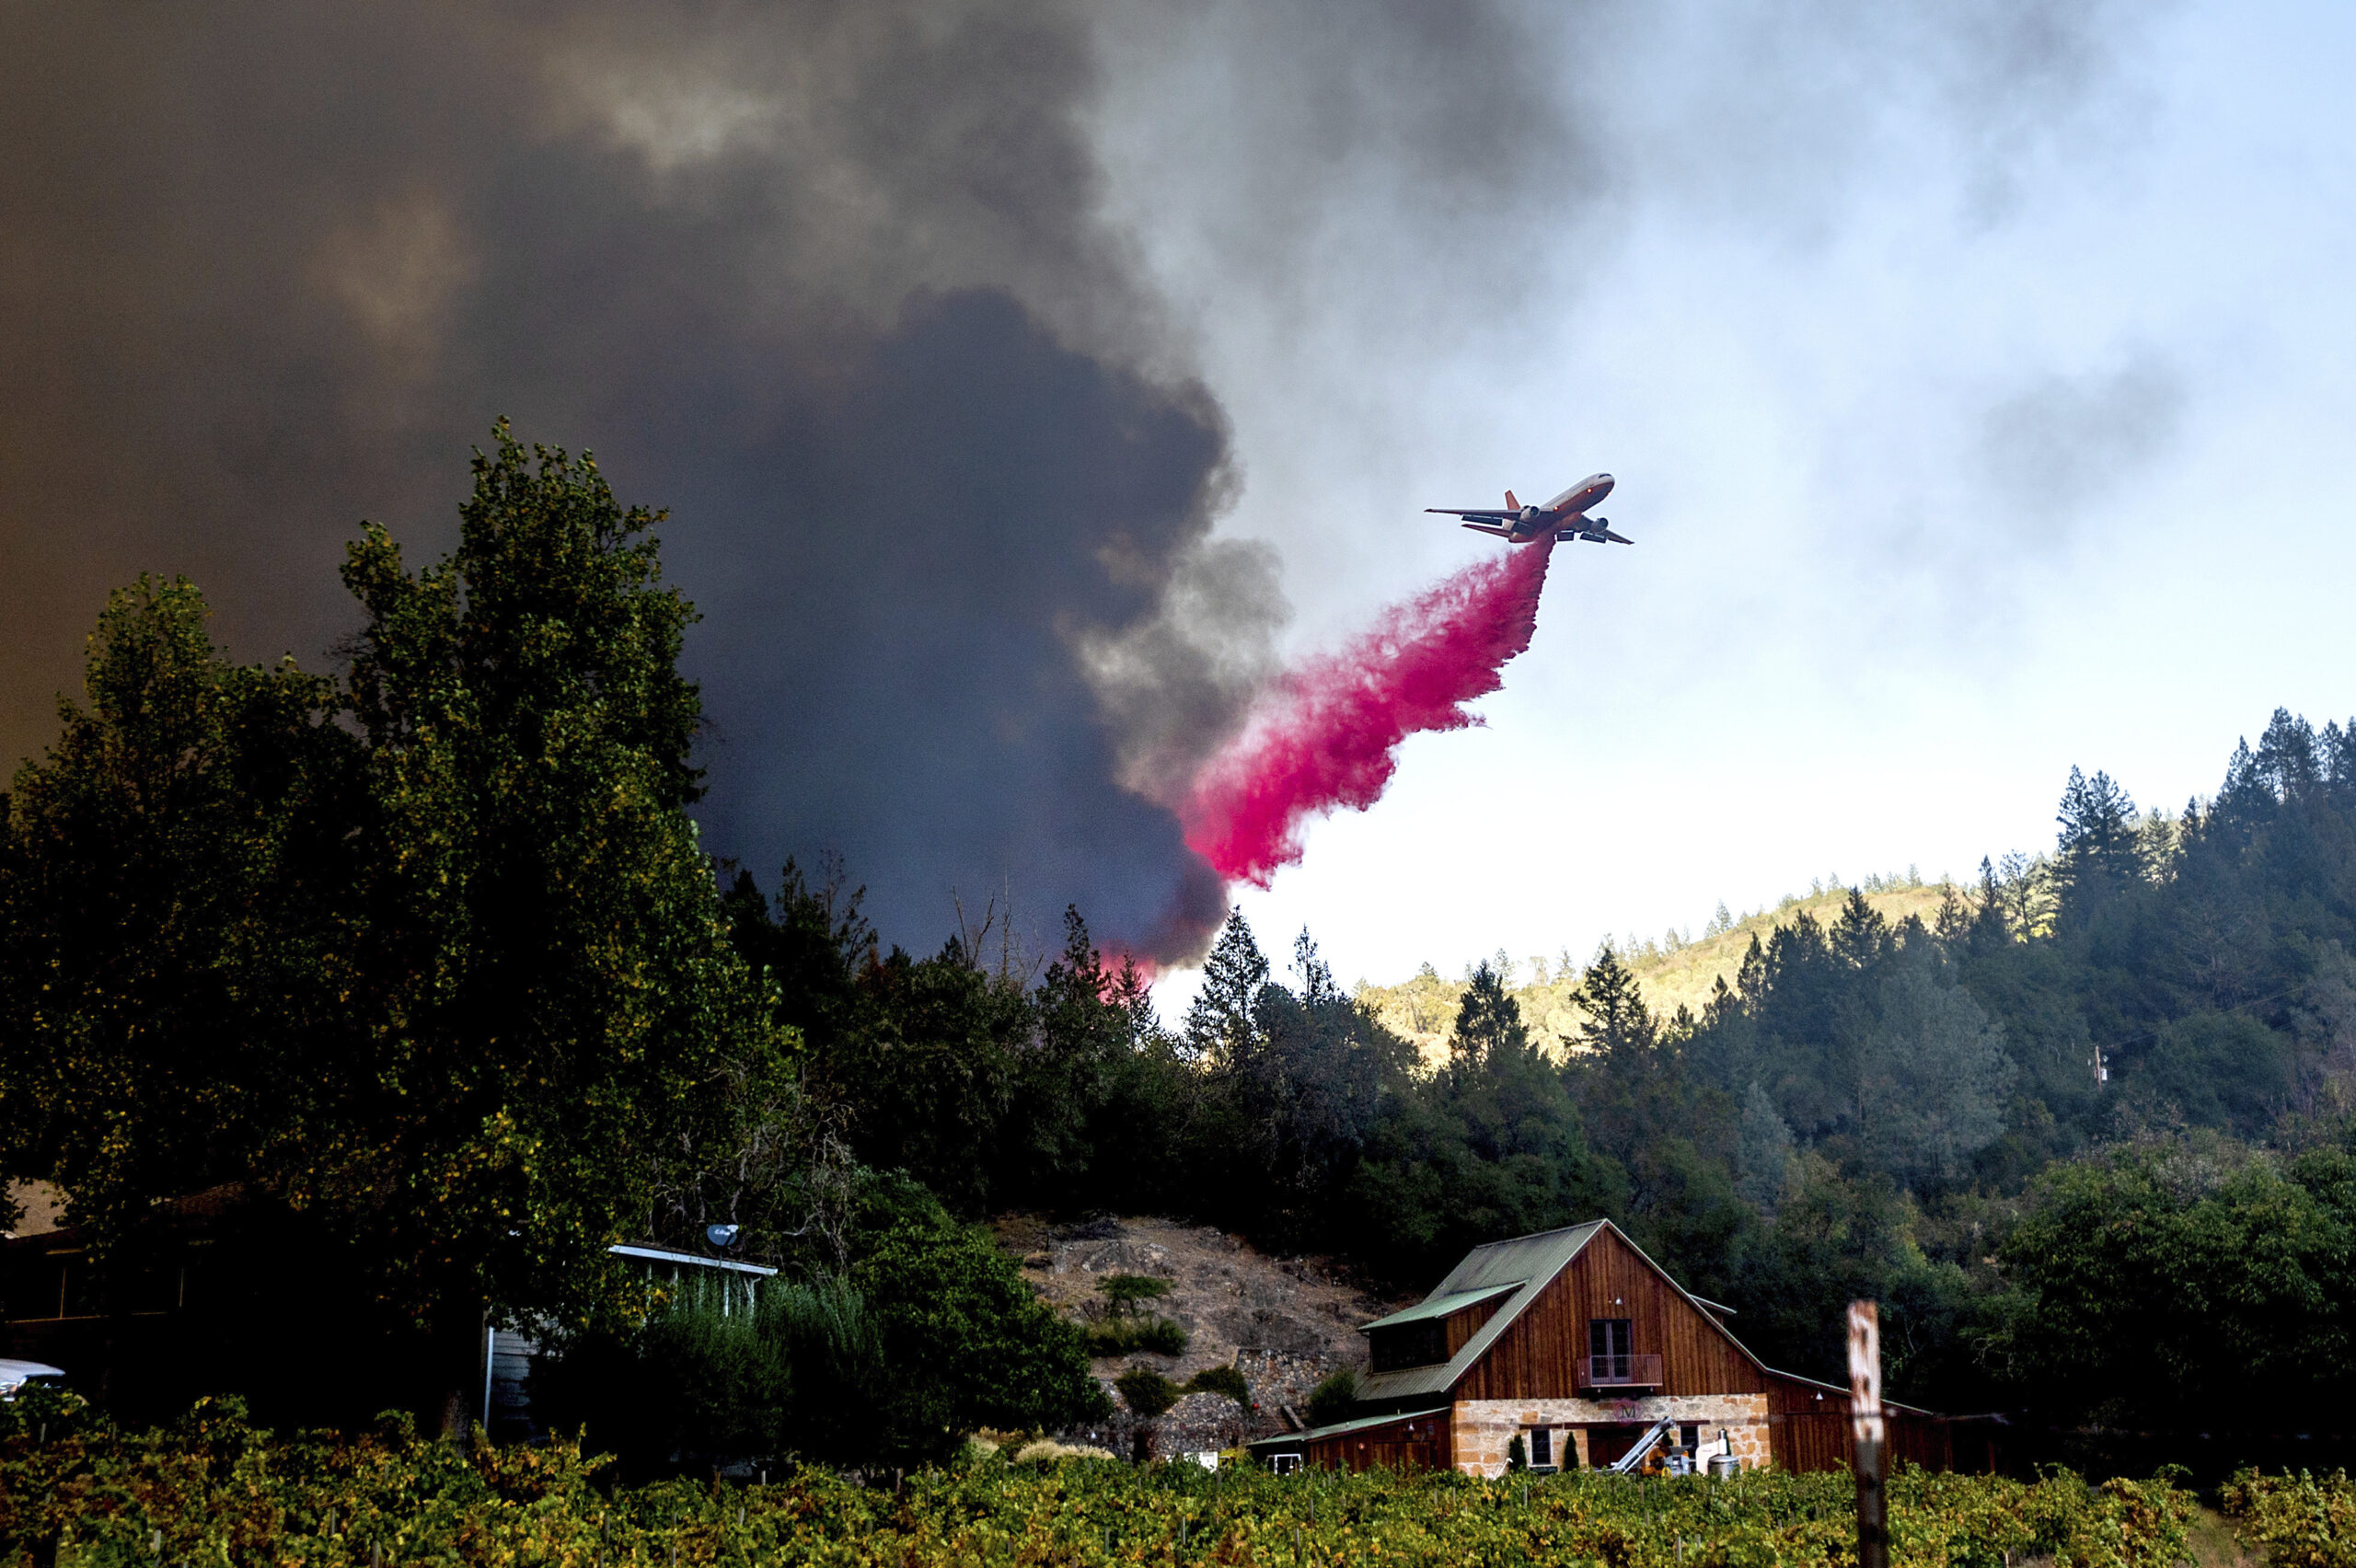 An airplane drops retardant on forest fire